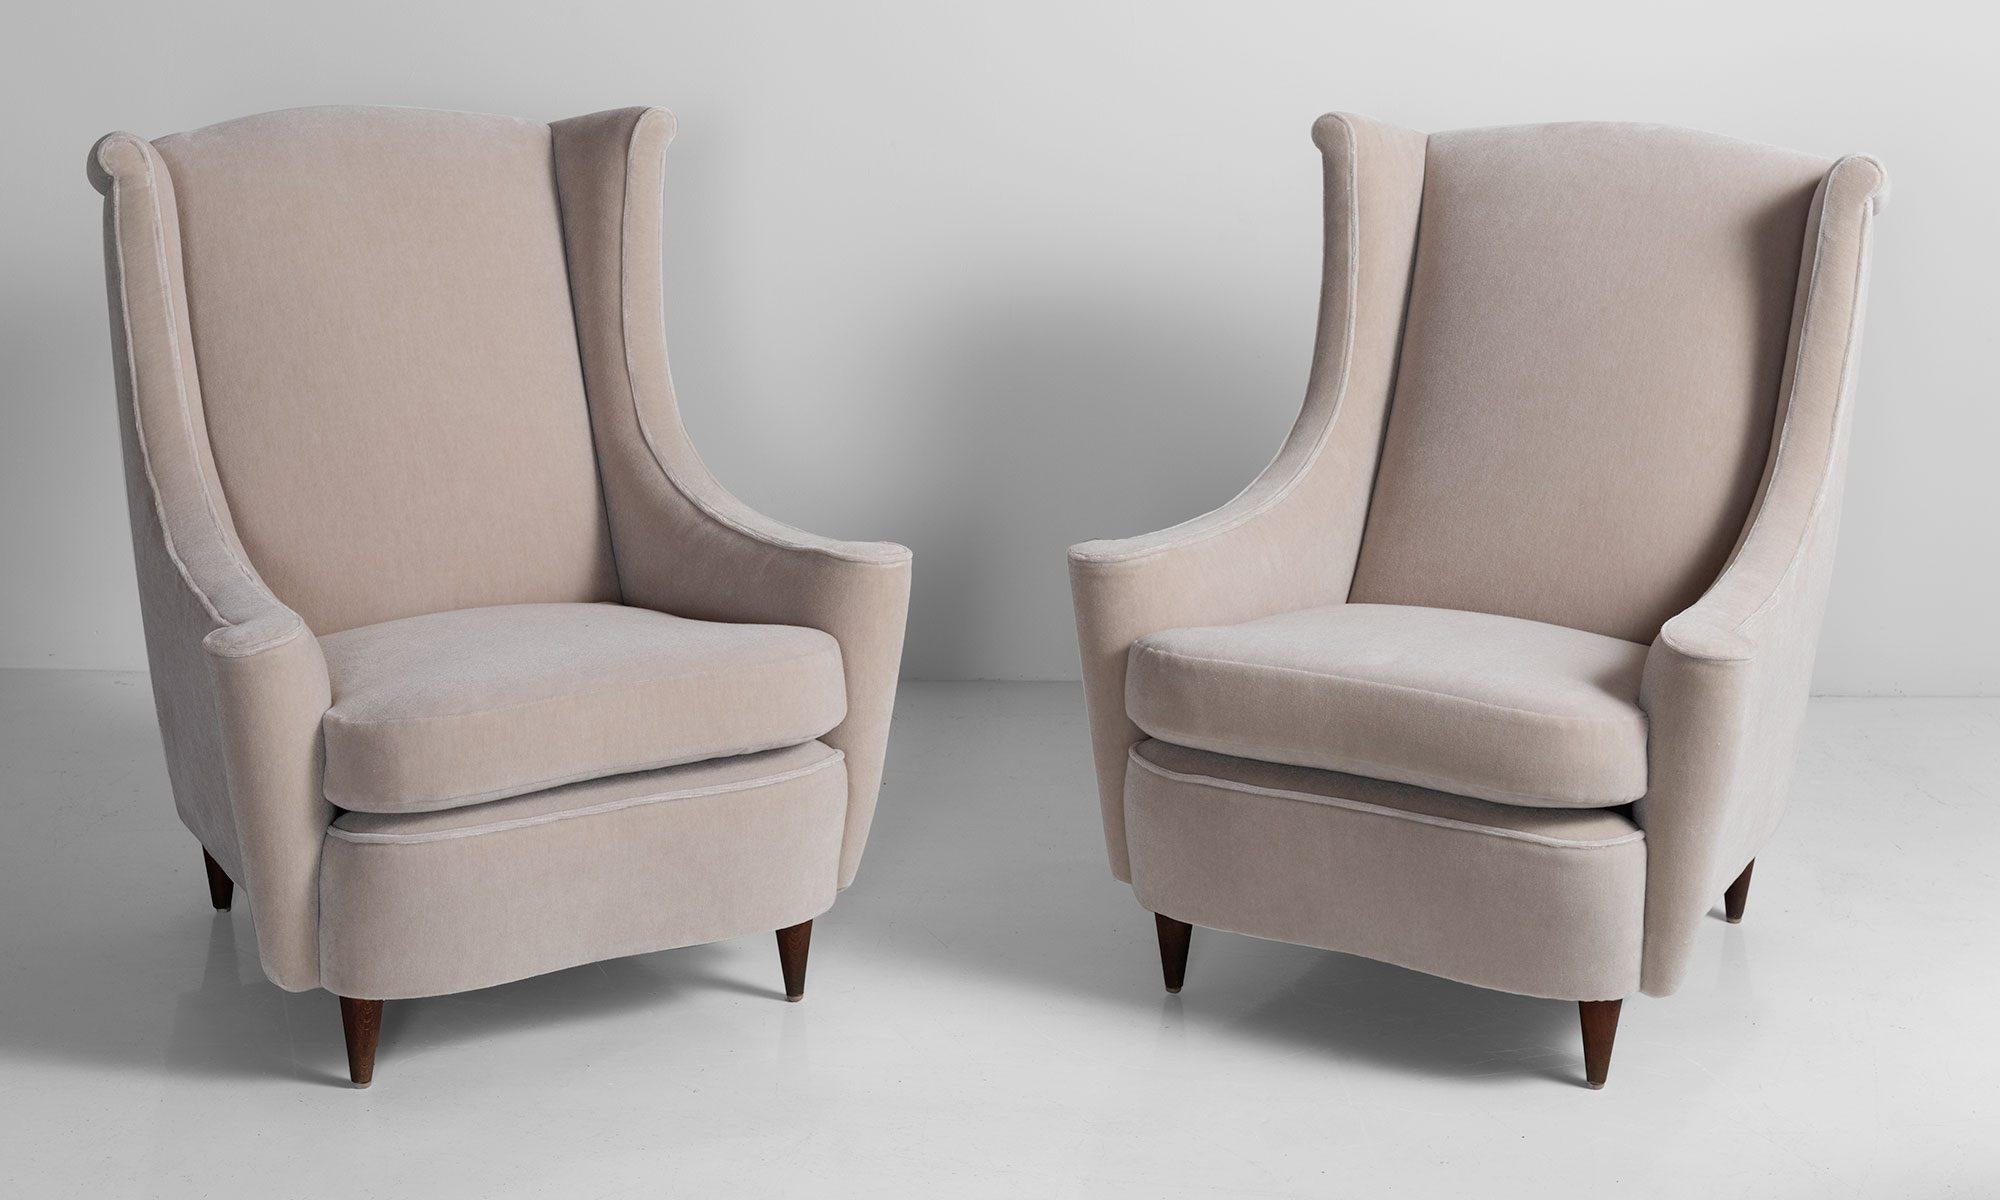 Pair of Mohair Armchairs, Italy 1960.

Modern Italian armchairs newly reupholstered in Maharam Mohair Supreme.